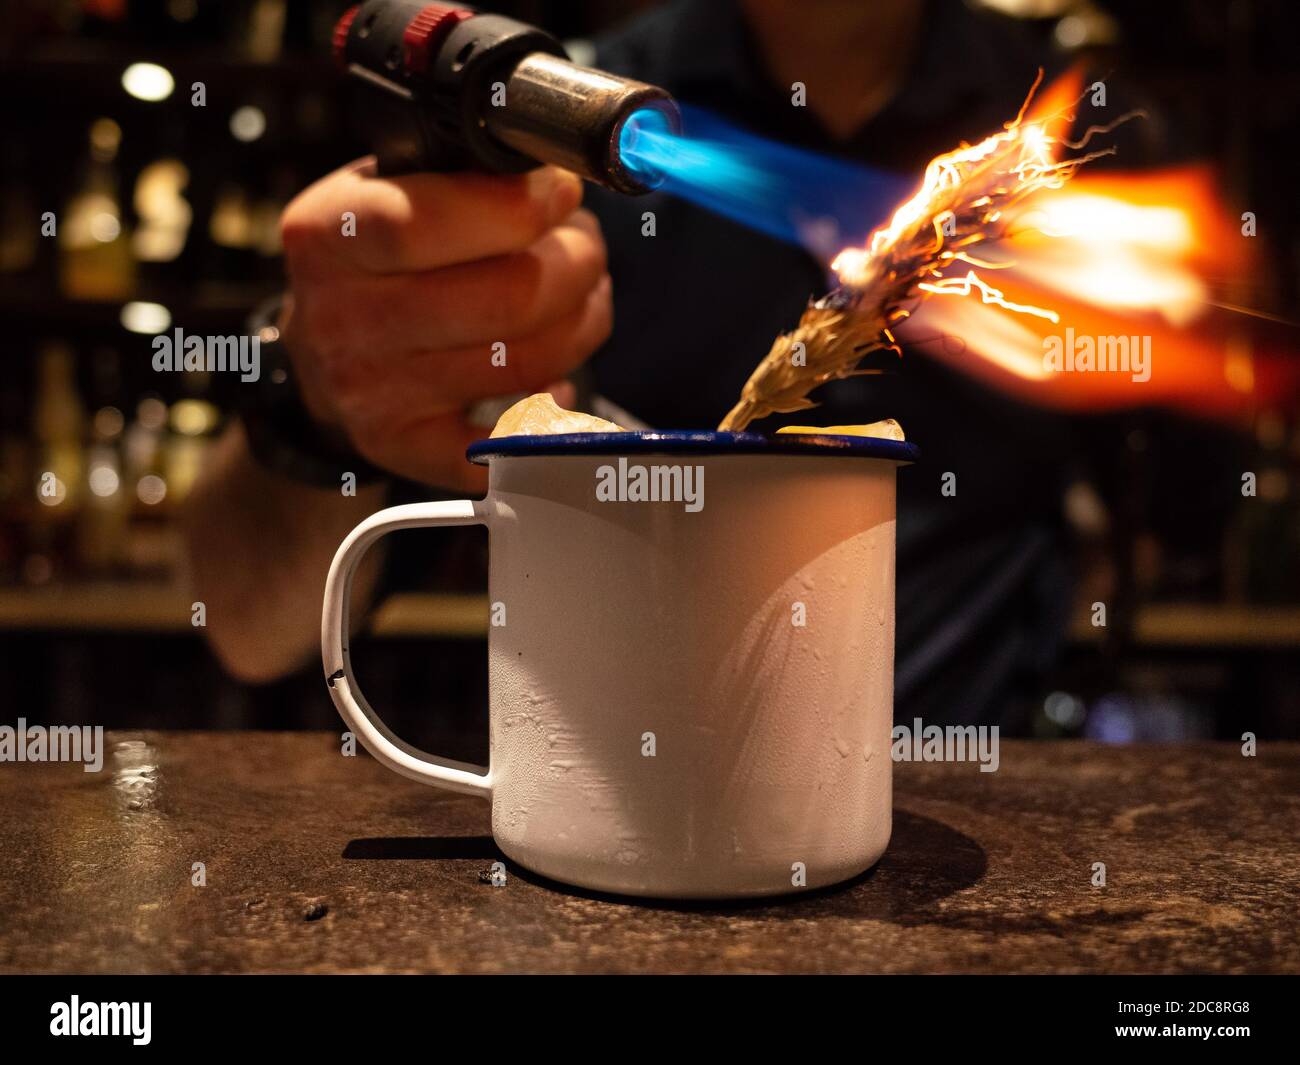 Blow torch used during a cocktail masterclass Stock Photo